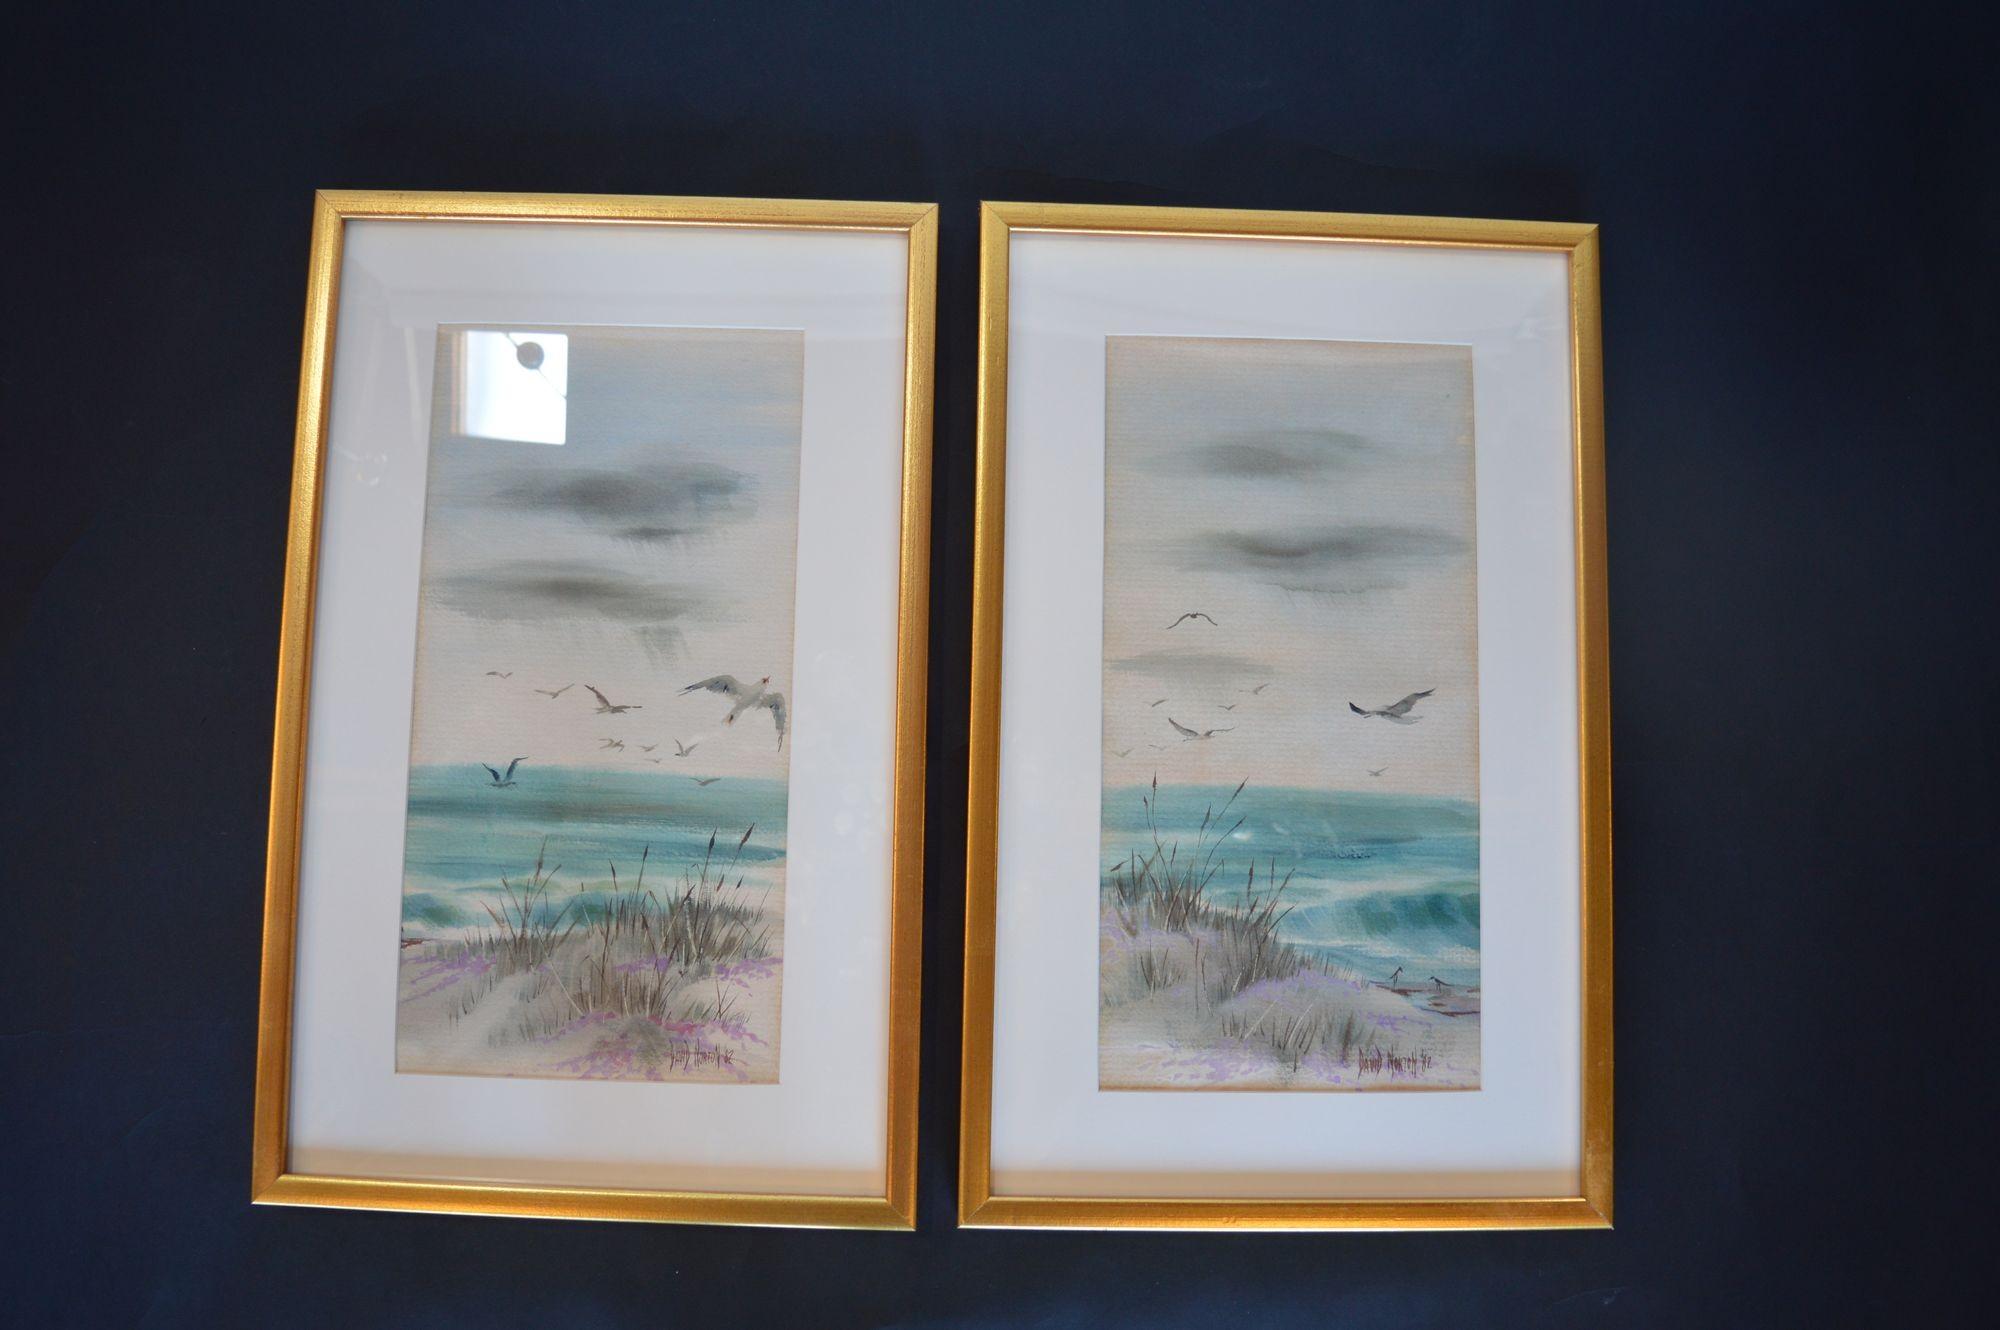 Signed David Norton Diptych watercolor painting on canvas. Dated 1982 on signature.